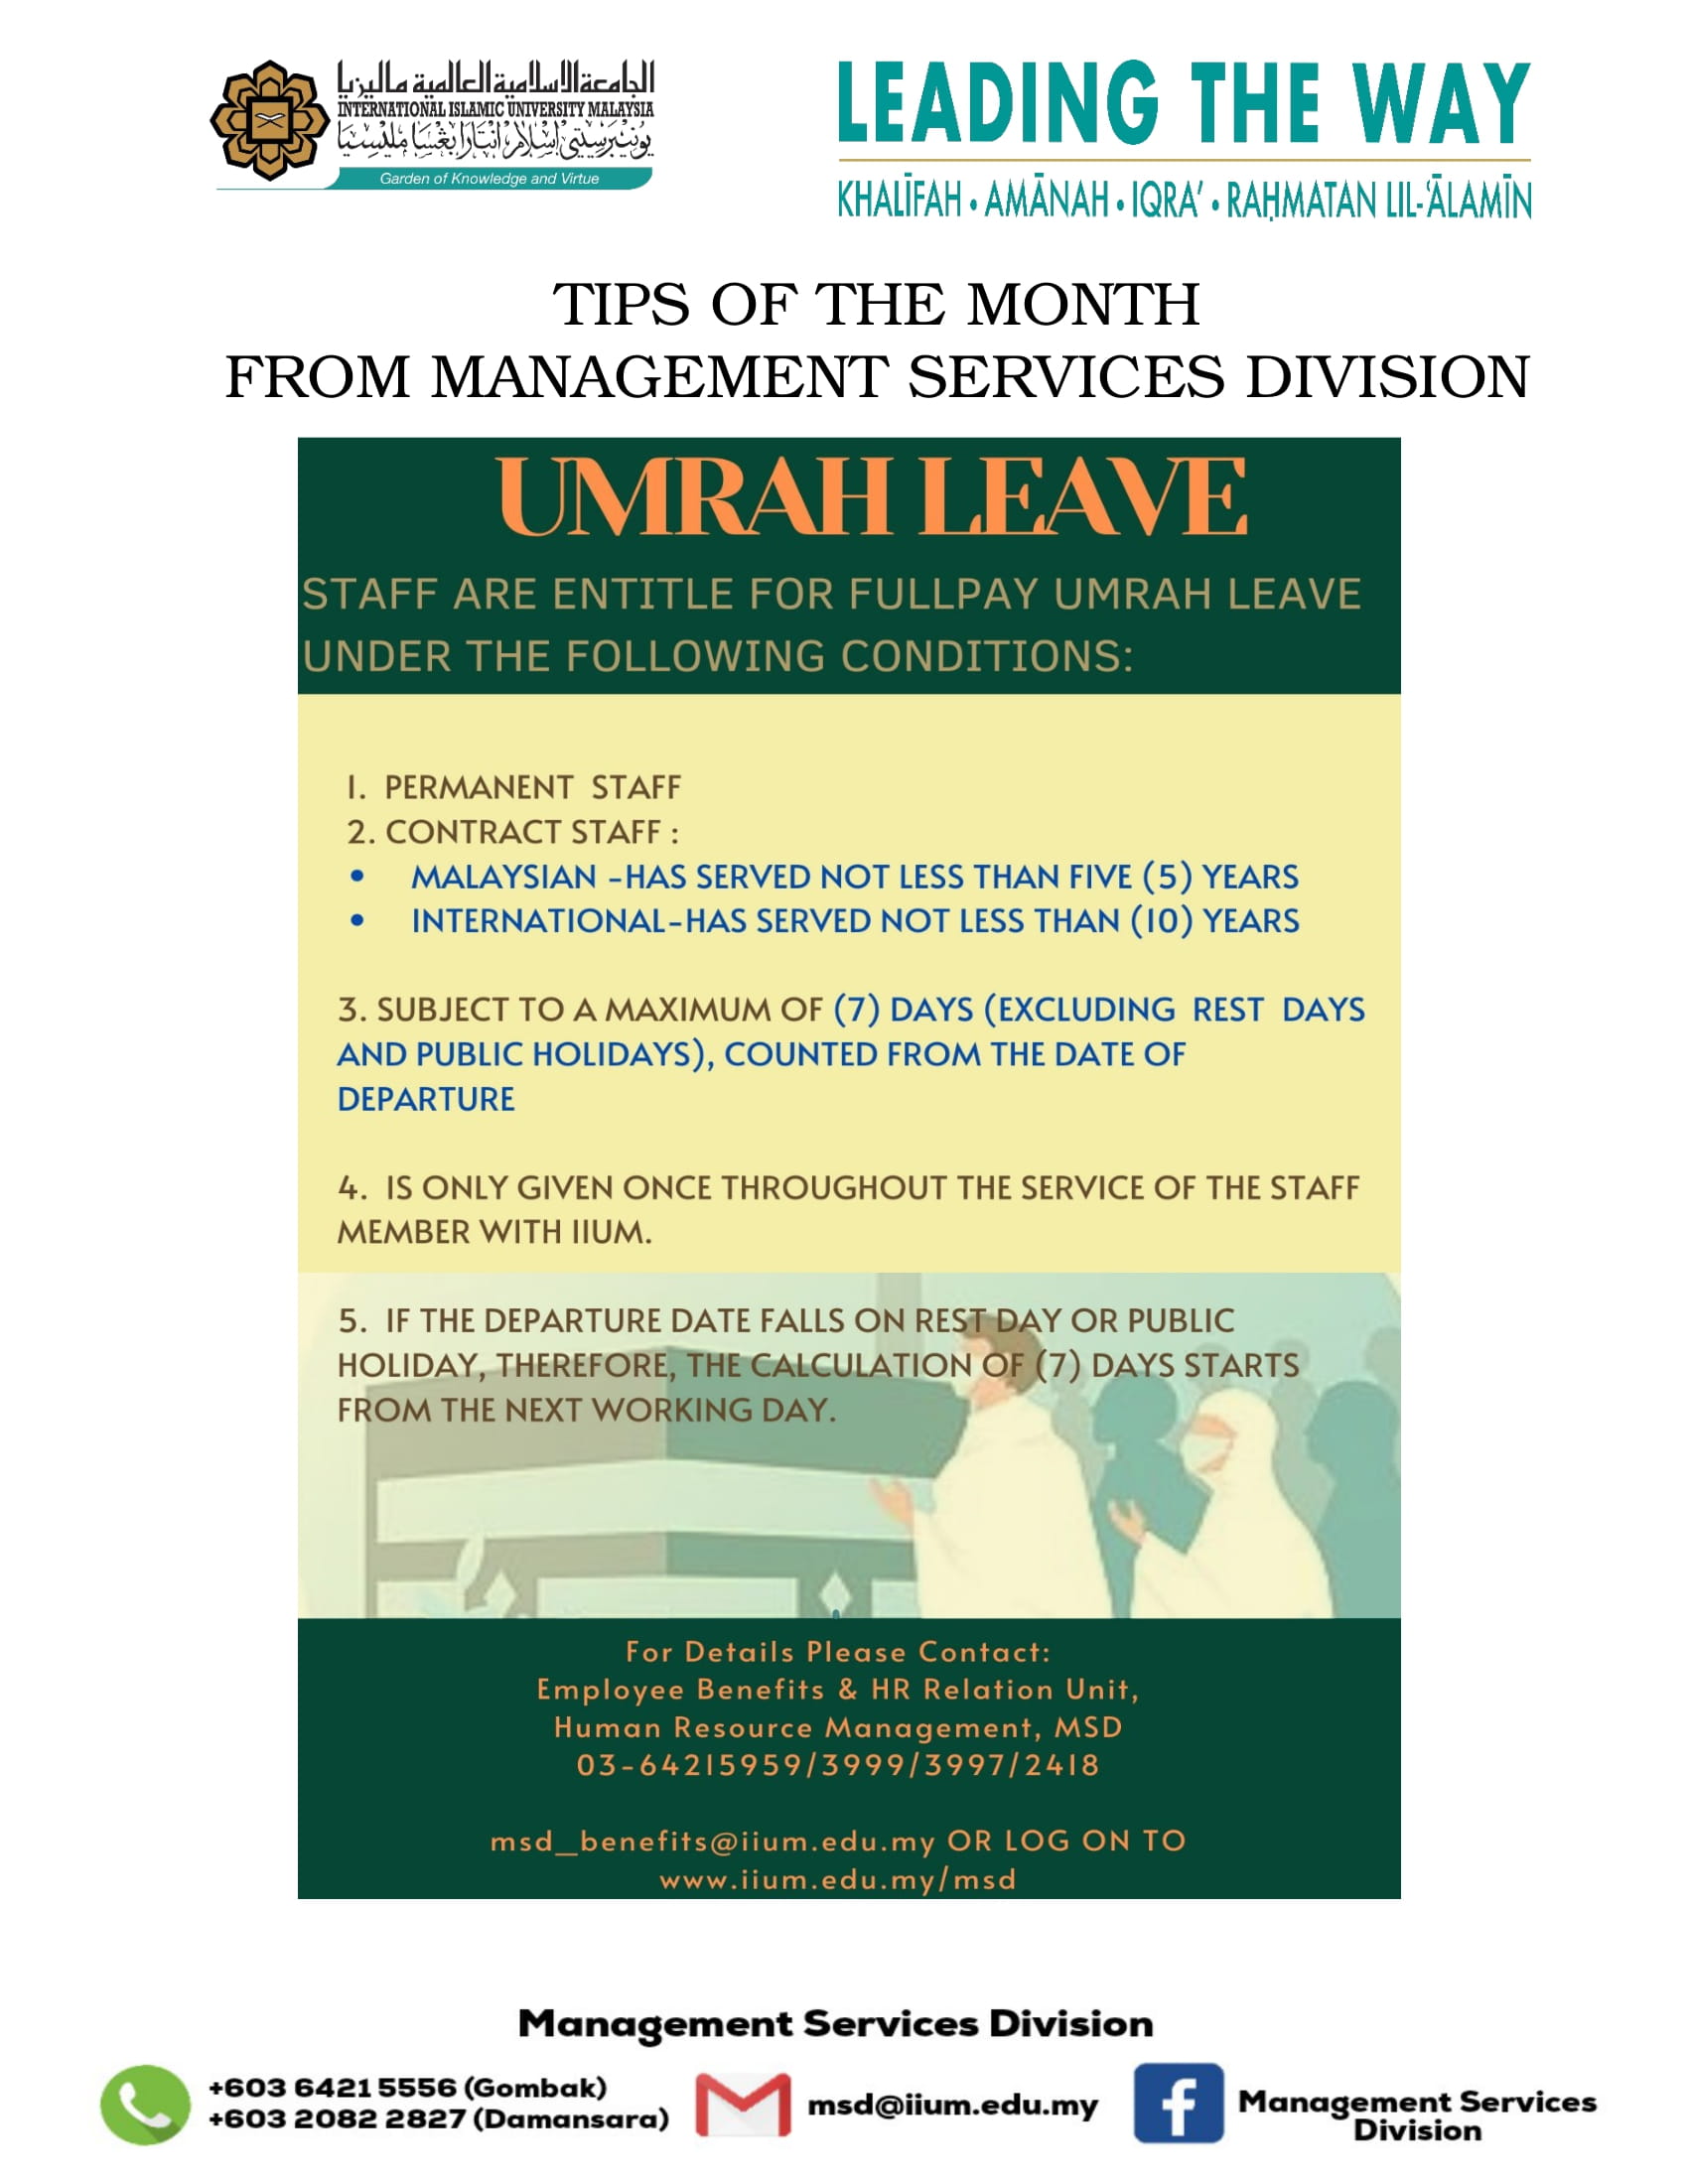 Tips of the Month Umrah Leave